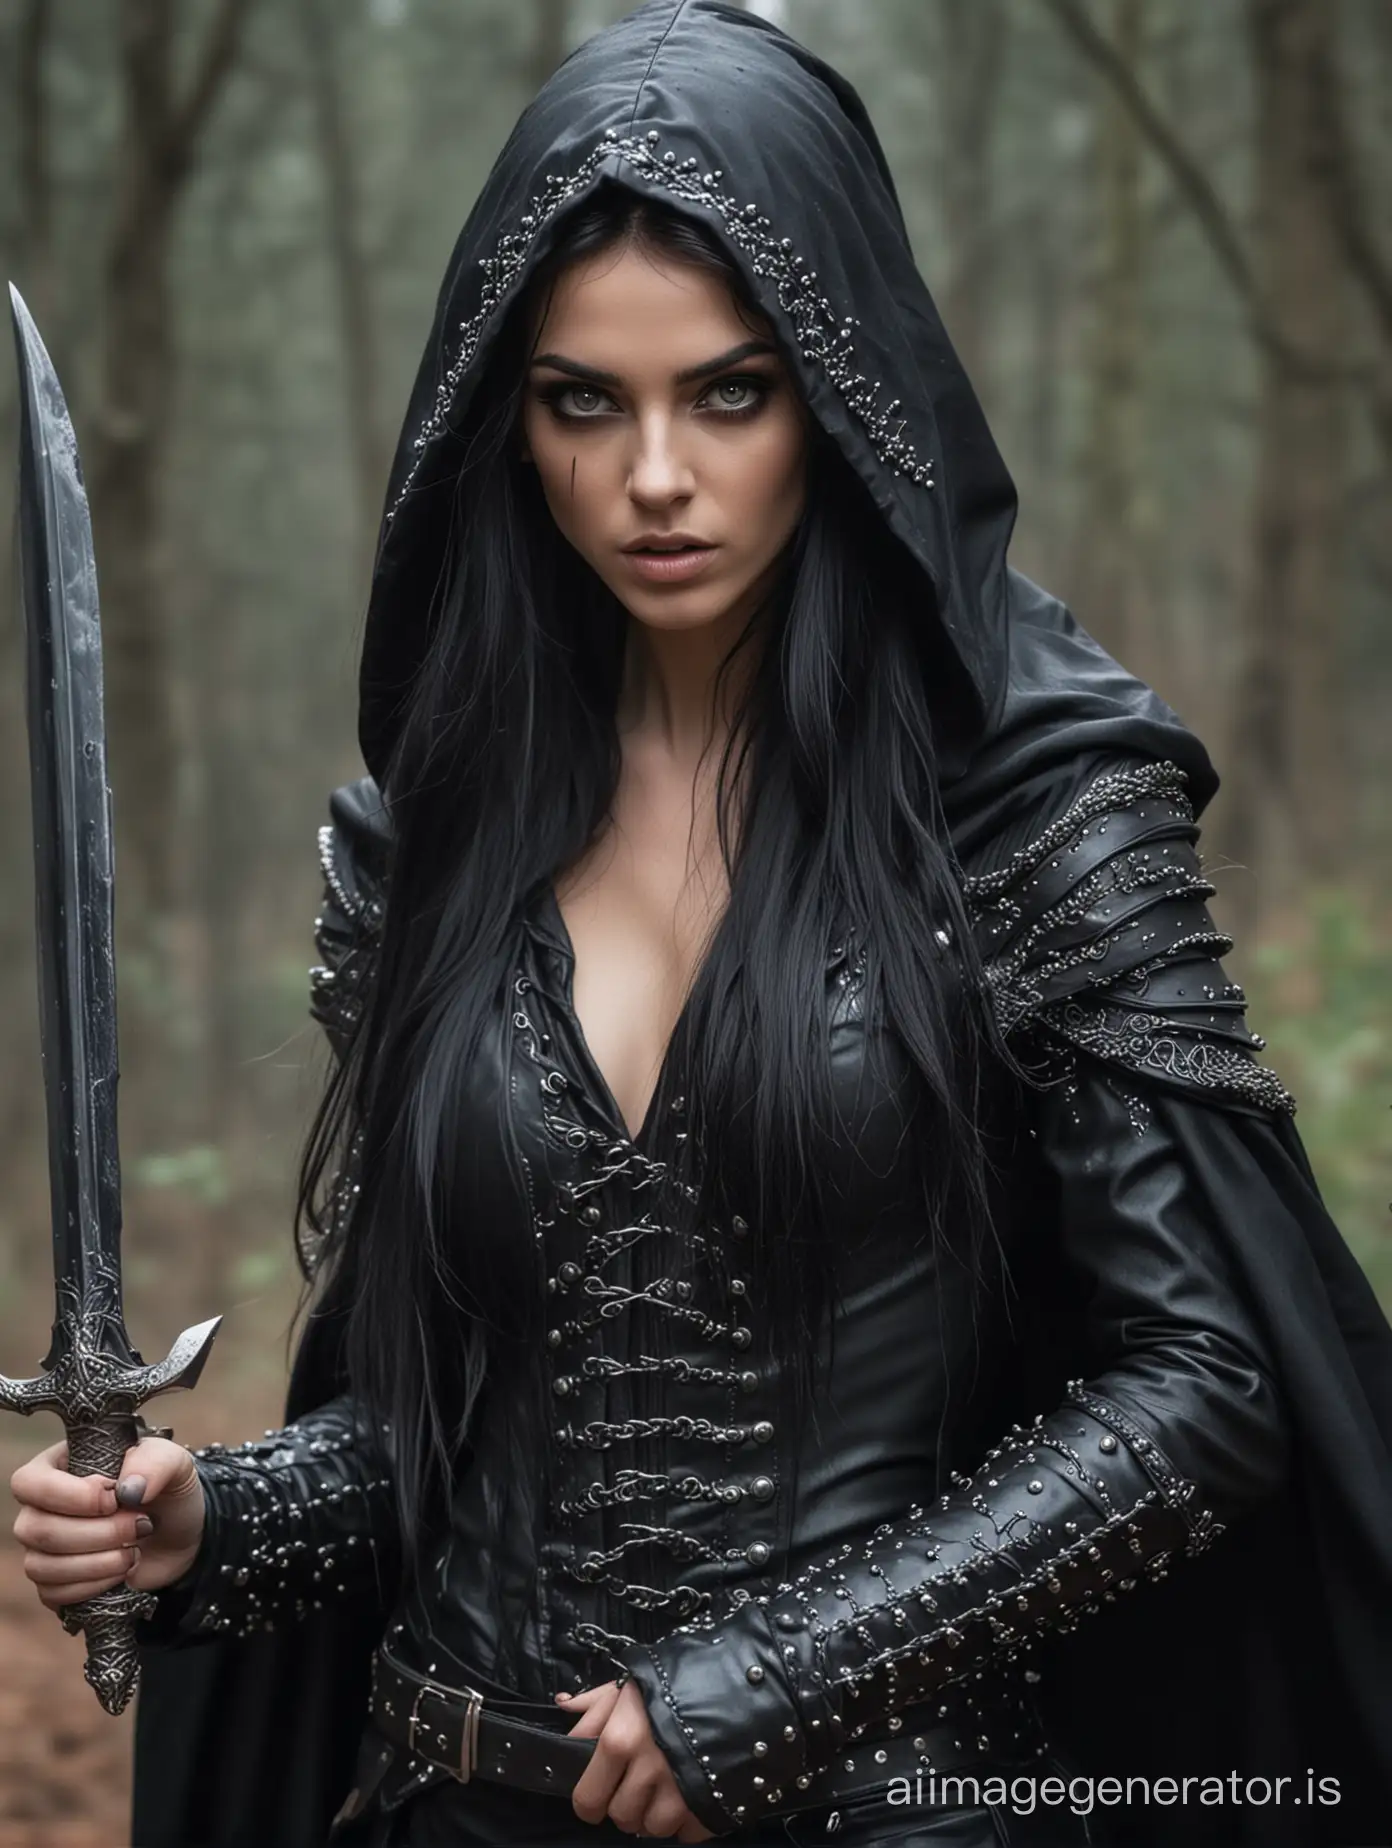 Mysterious-Elven-Bard-in-Black-Studded-Armor-with-Dagger